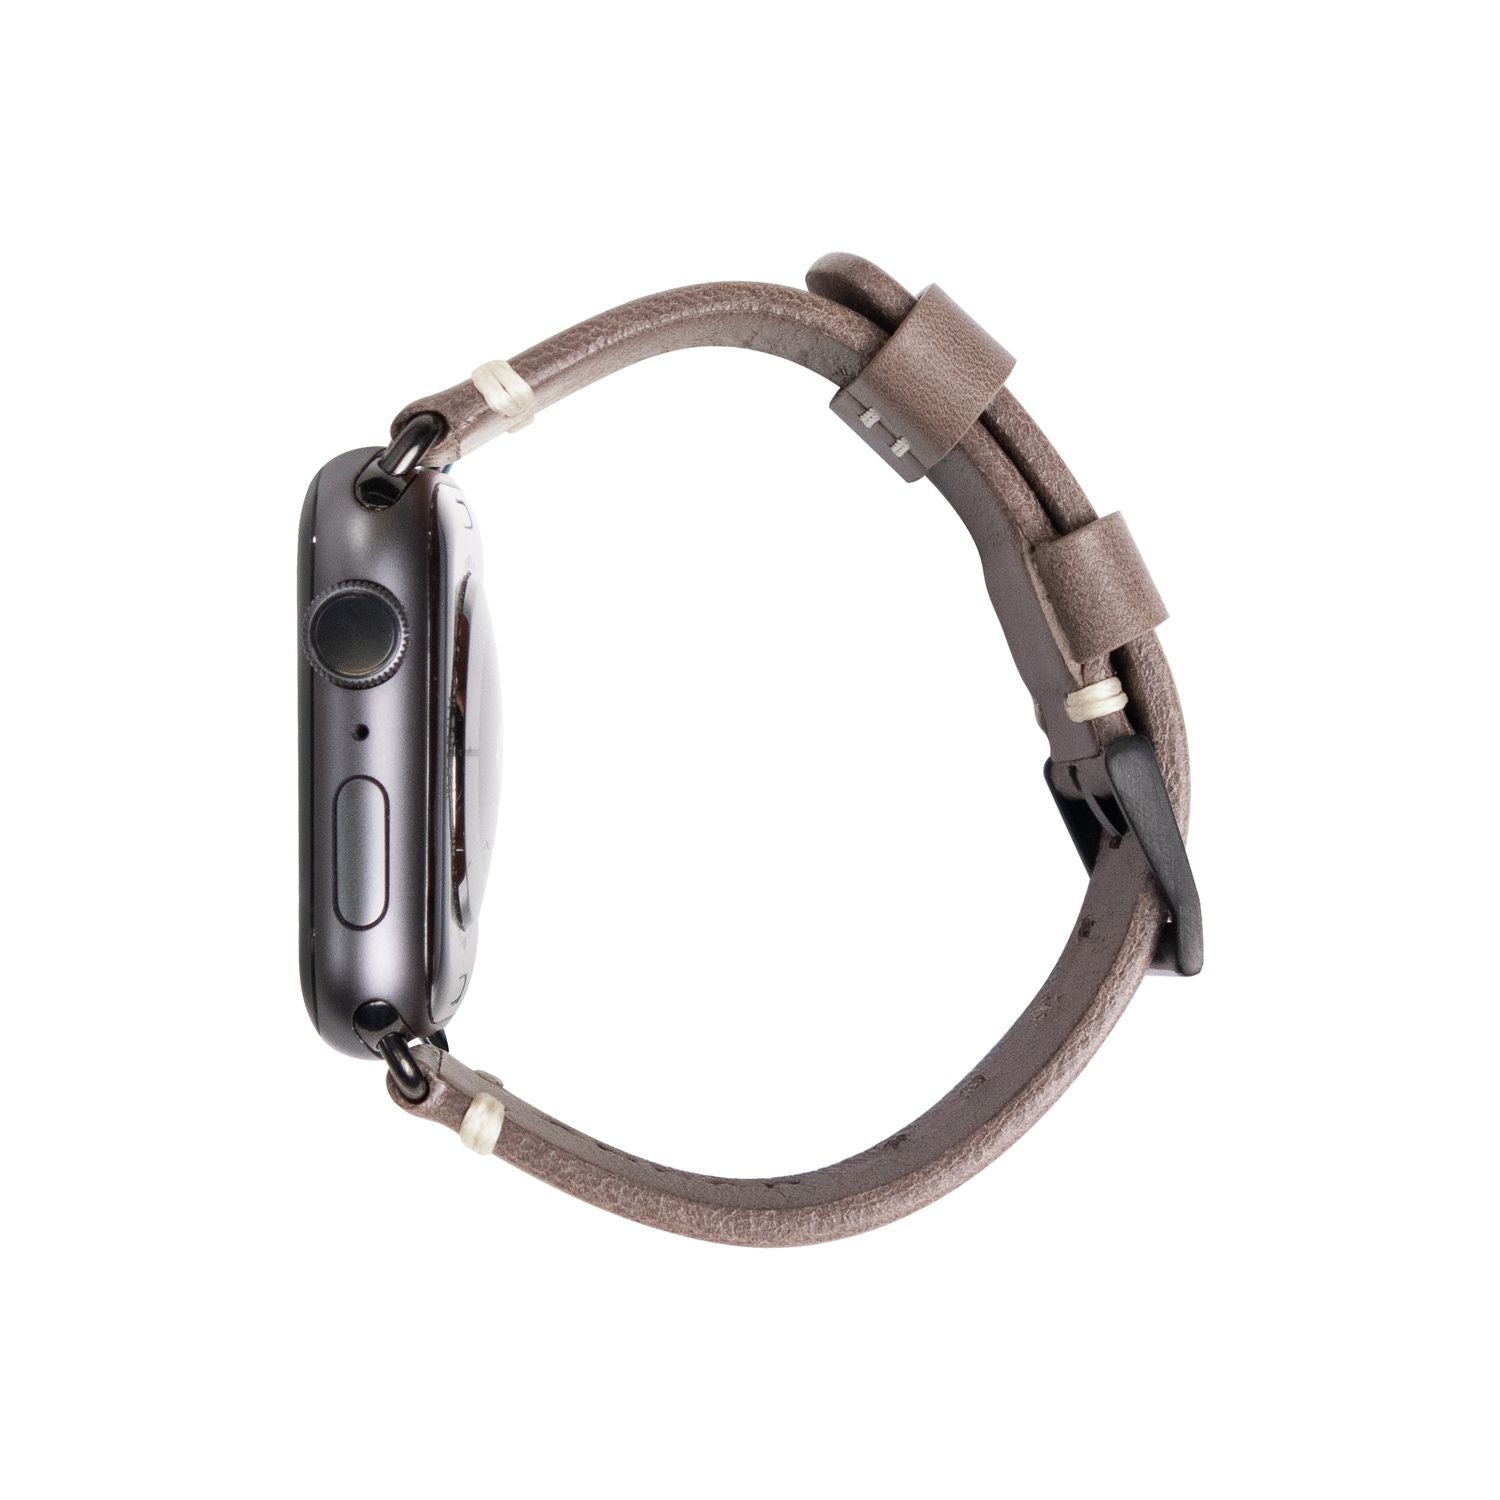 The Watch Band